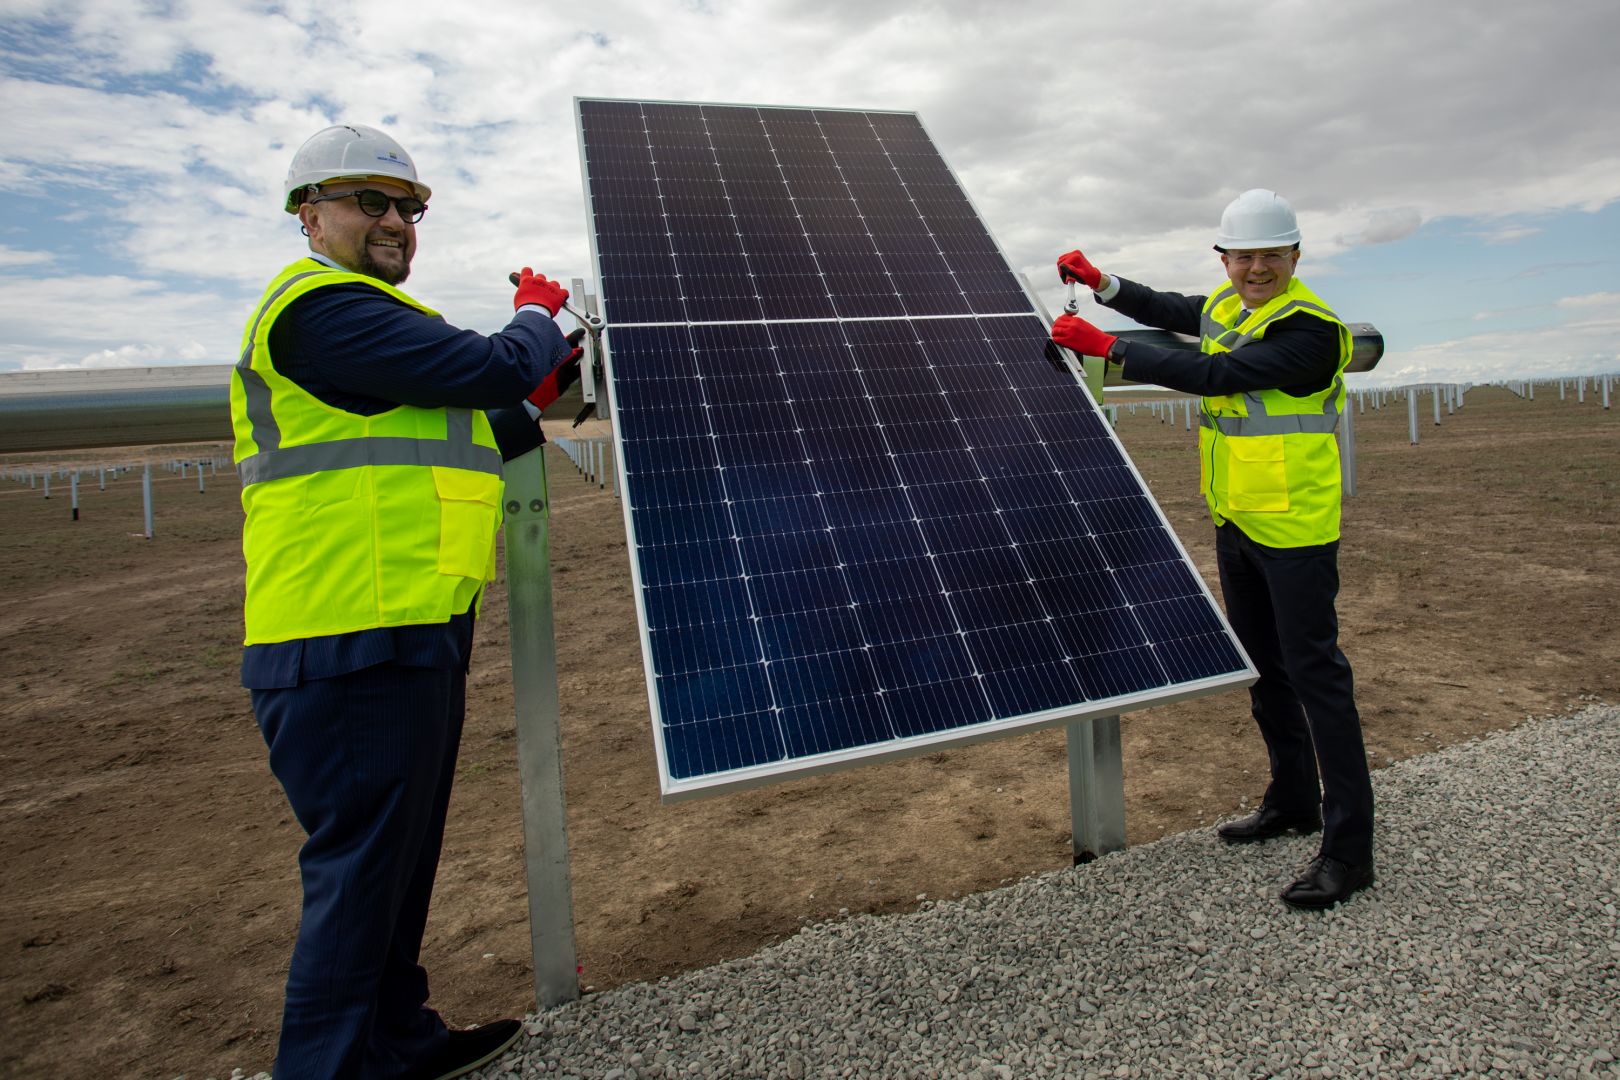 First solar panel has been installed at Garadagh SPP - Gallery Image